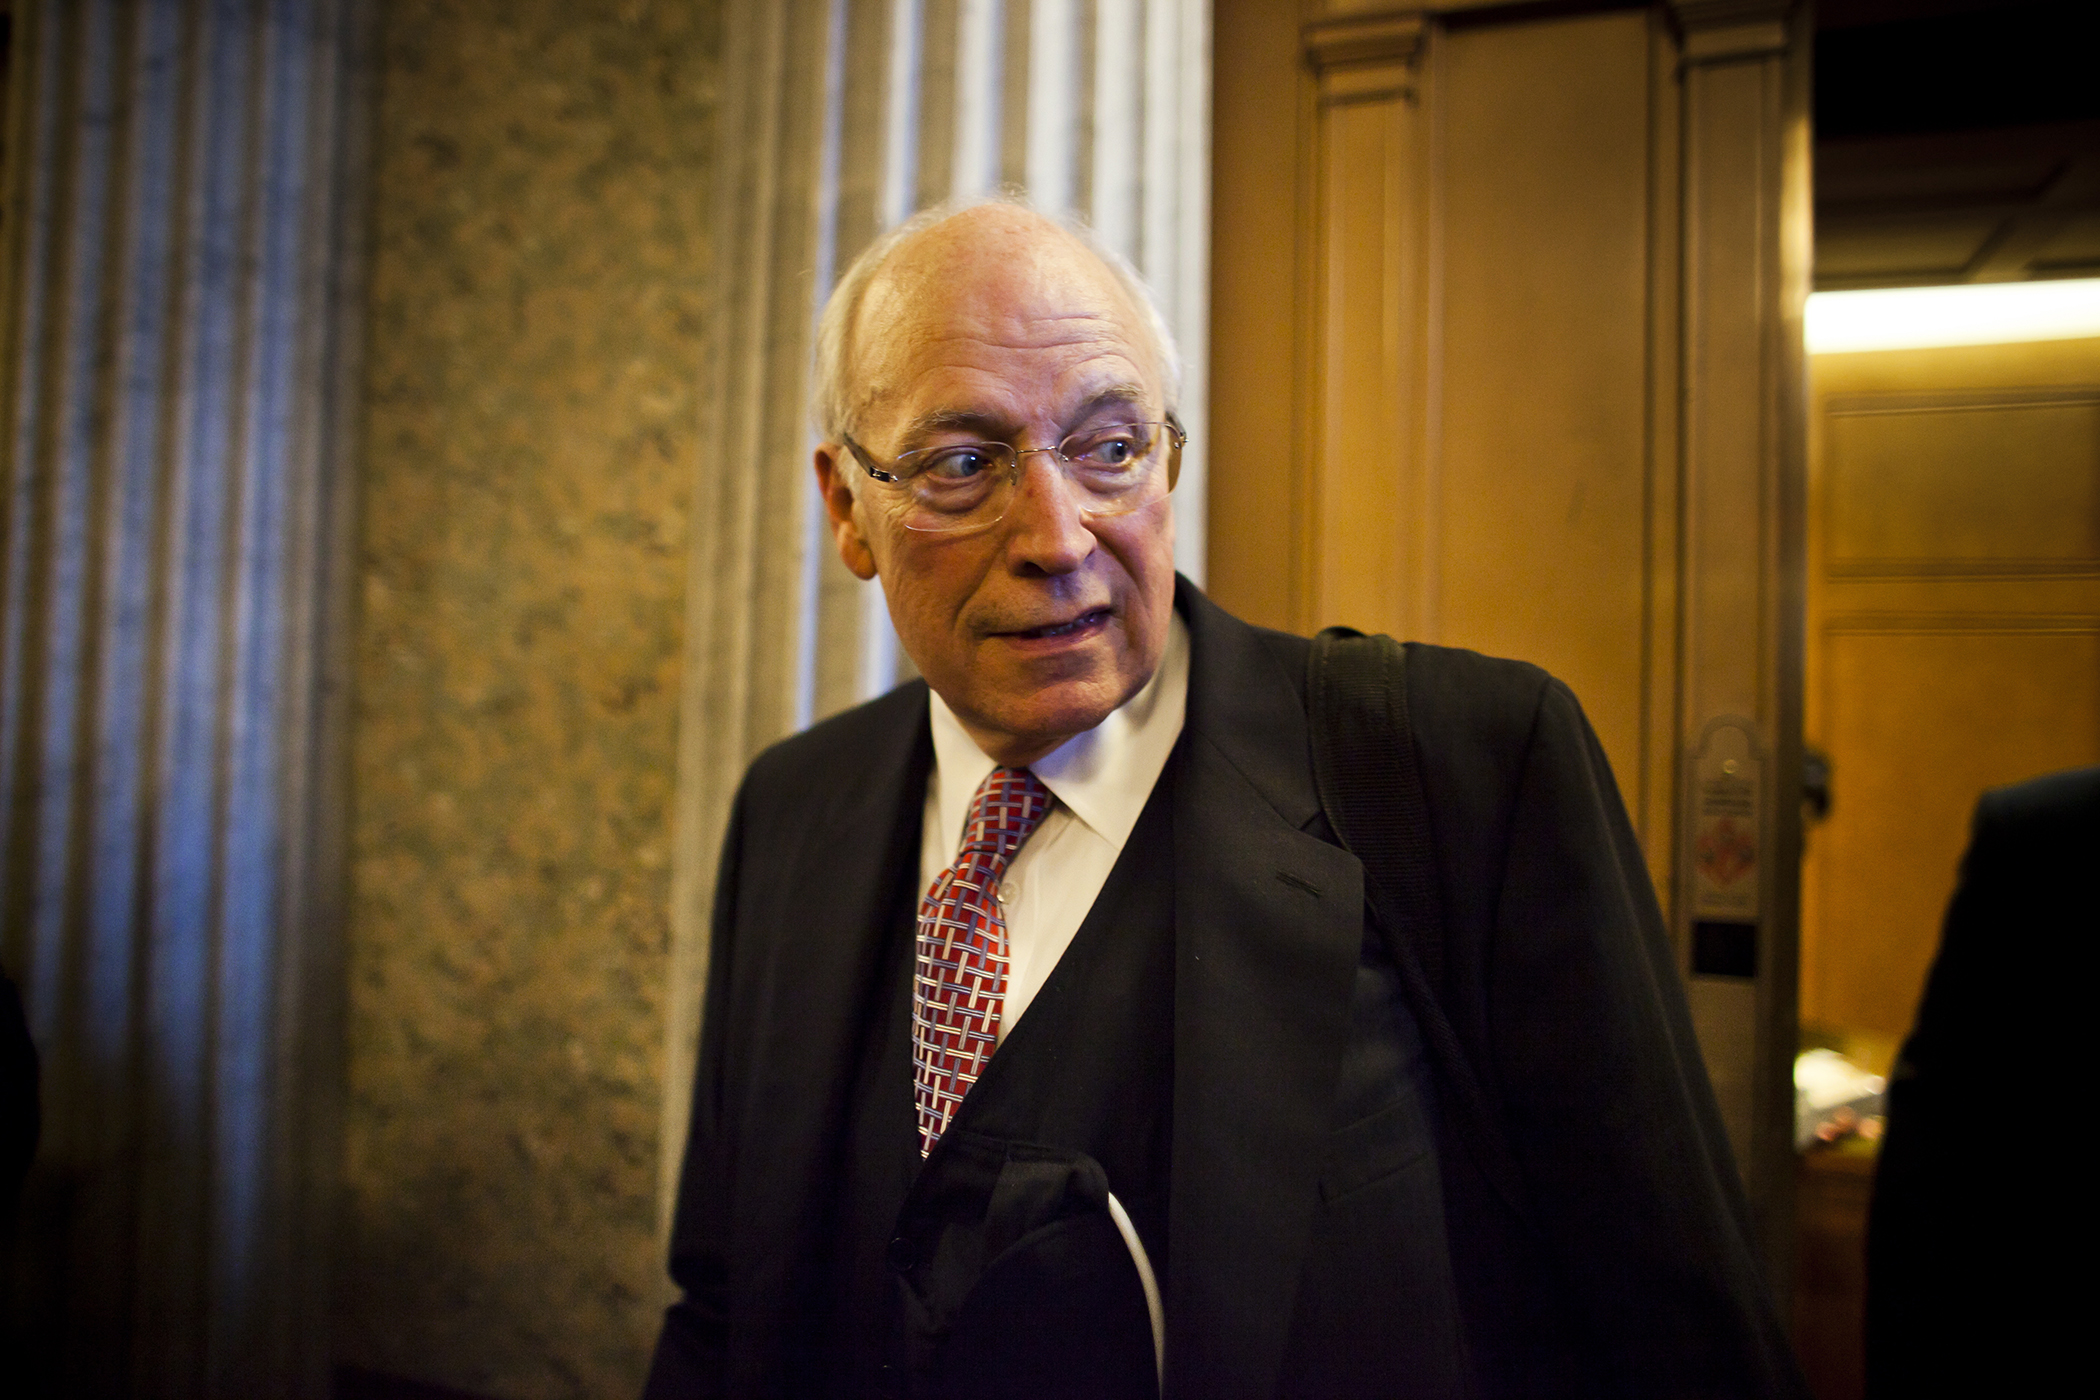 On gay marriage sibling spat, Dick Cheney sides with